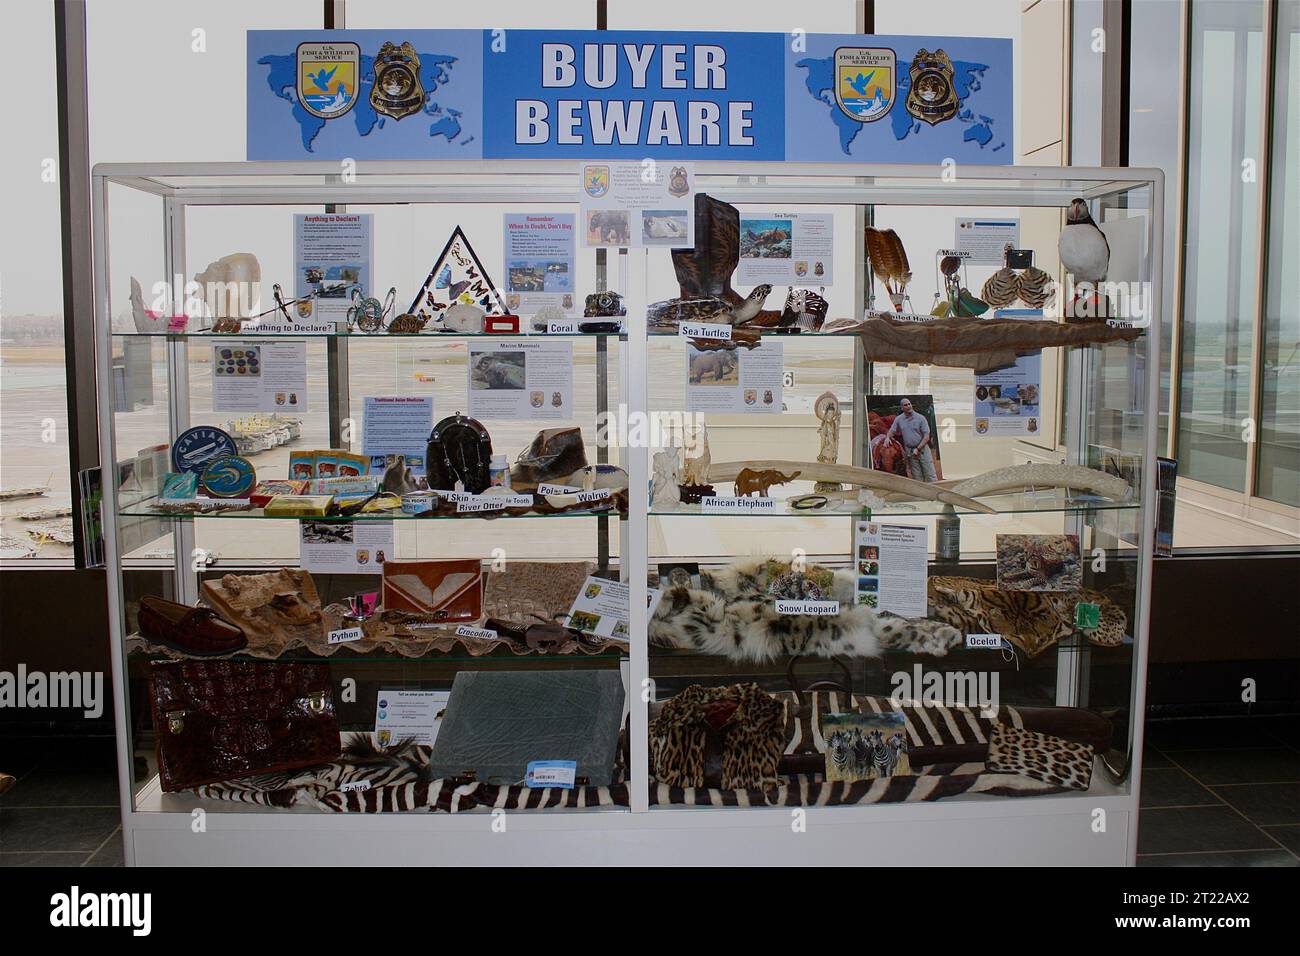 The Service's 'Buyer Beware' exhibit in Logan airport, Boston, MA. The display is designed to educate travelers about the hazards of buying animal products made from endangered species abroad. Subjects: Artifacts; Endangered species; Exhibits; Law enforcement. Location: Massachusetts.  . 1998 - 2011. Stock Photo